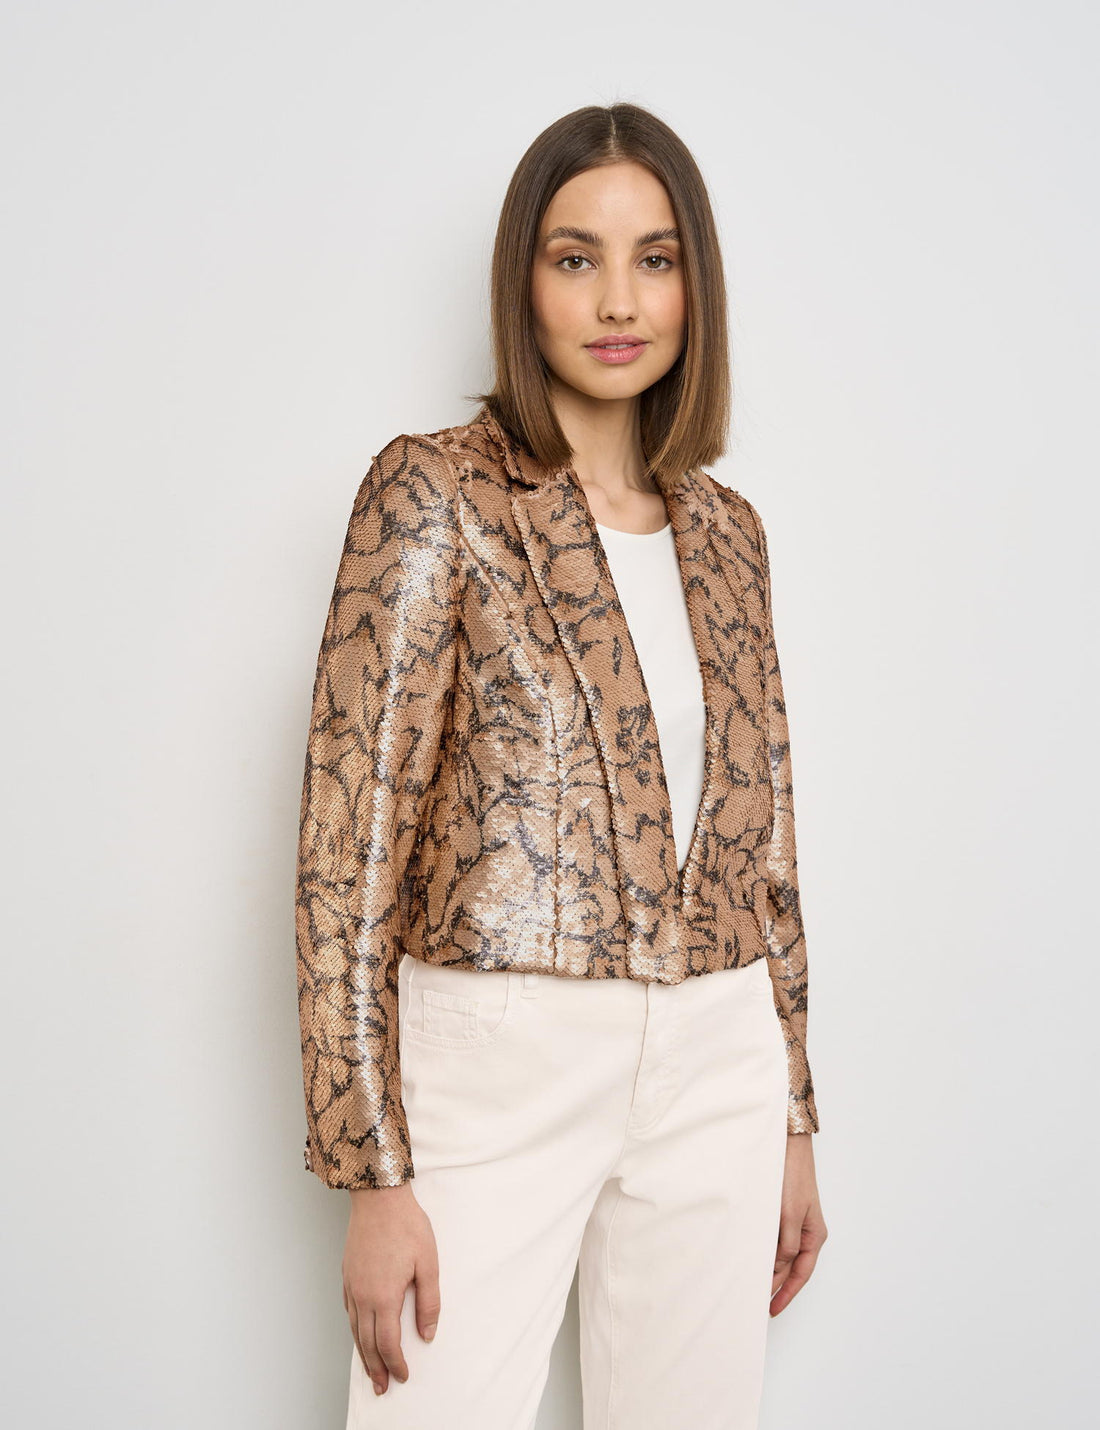 Short Blazer With All-Over Sequins_530311-11062_9282_01